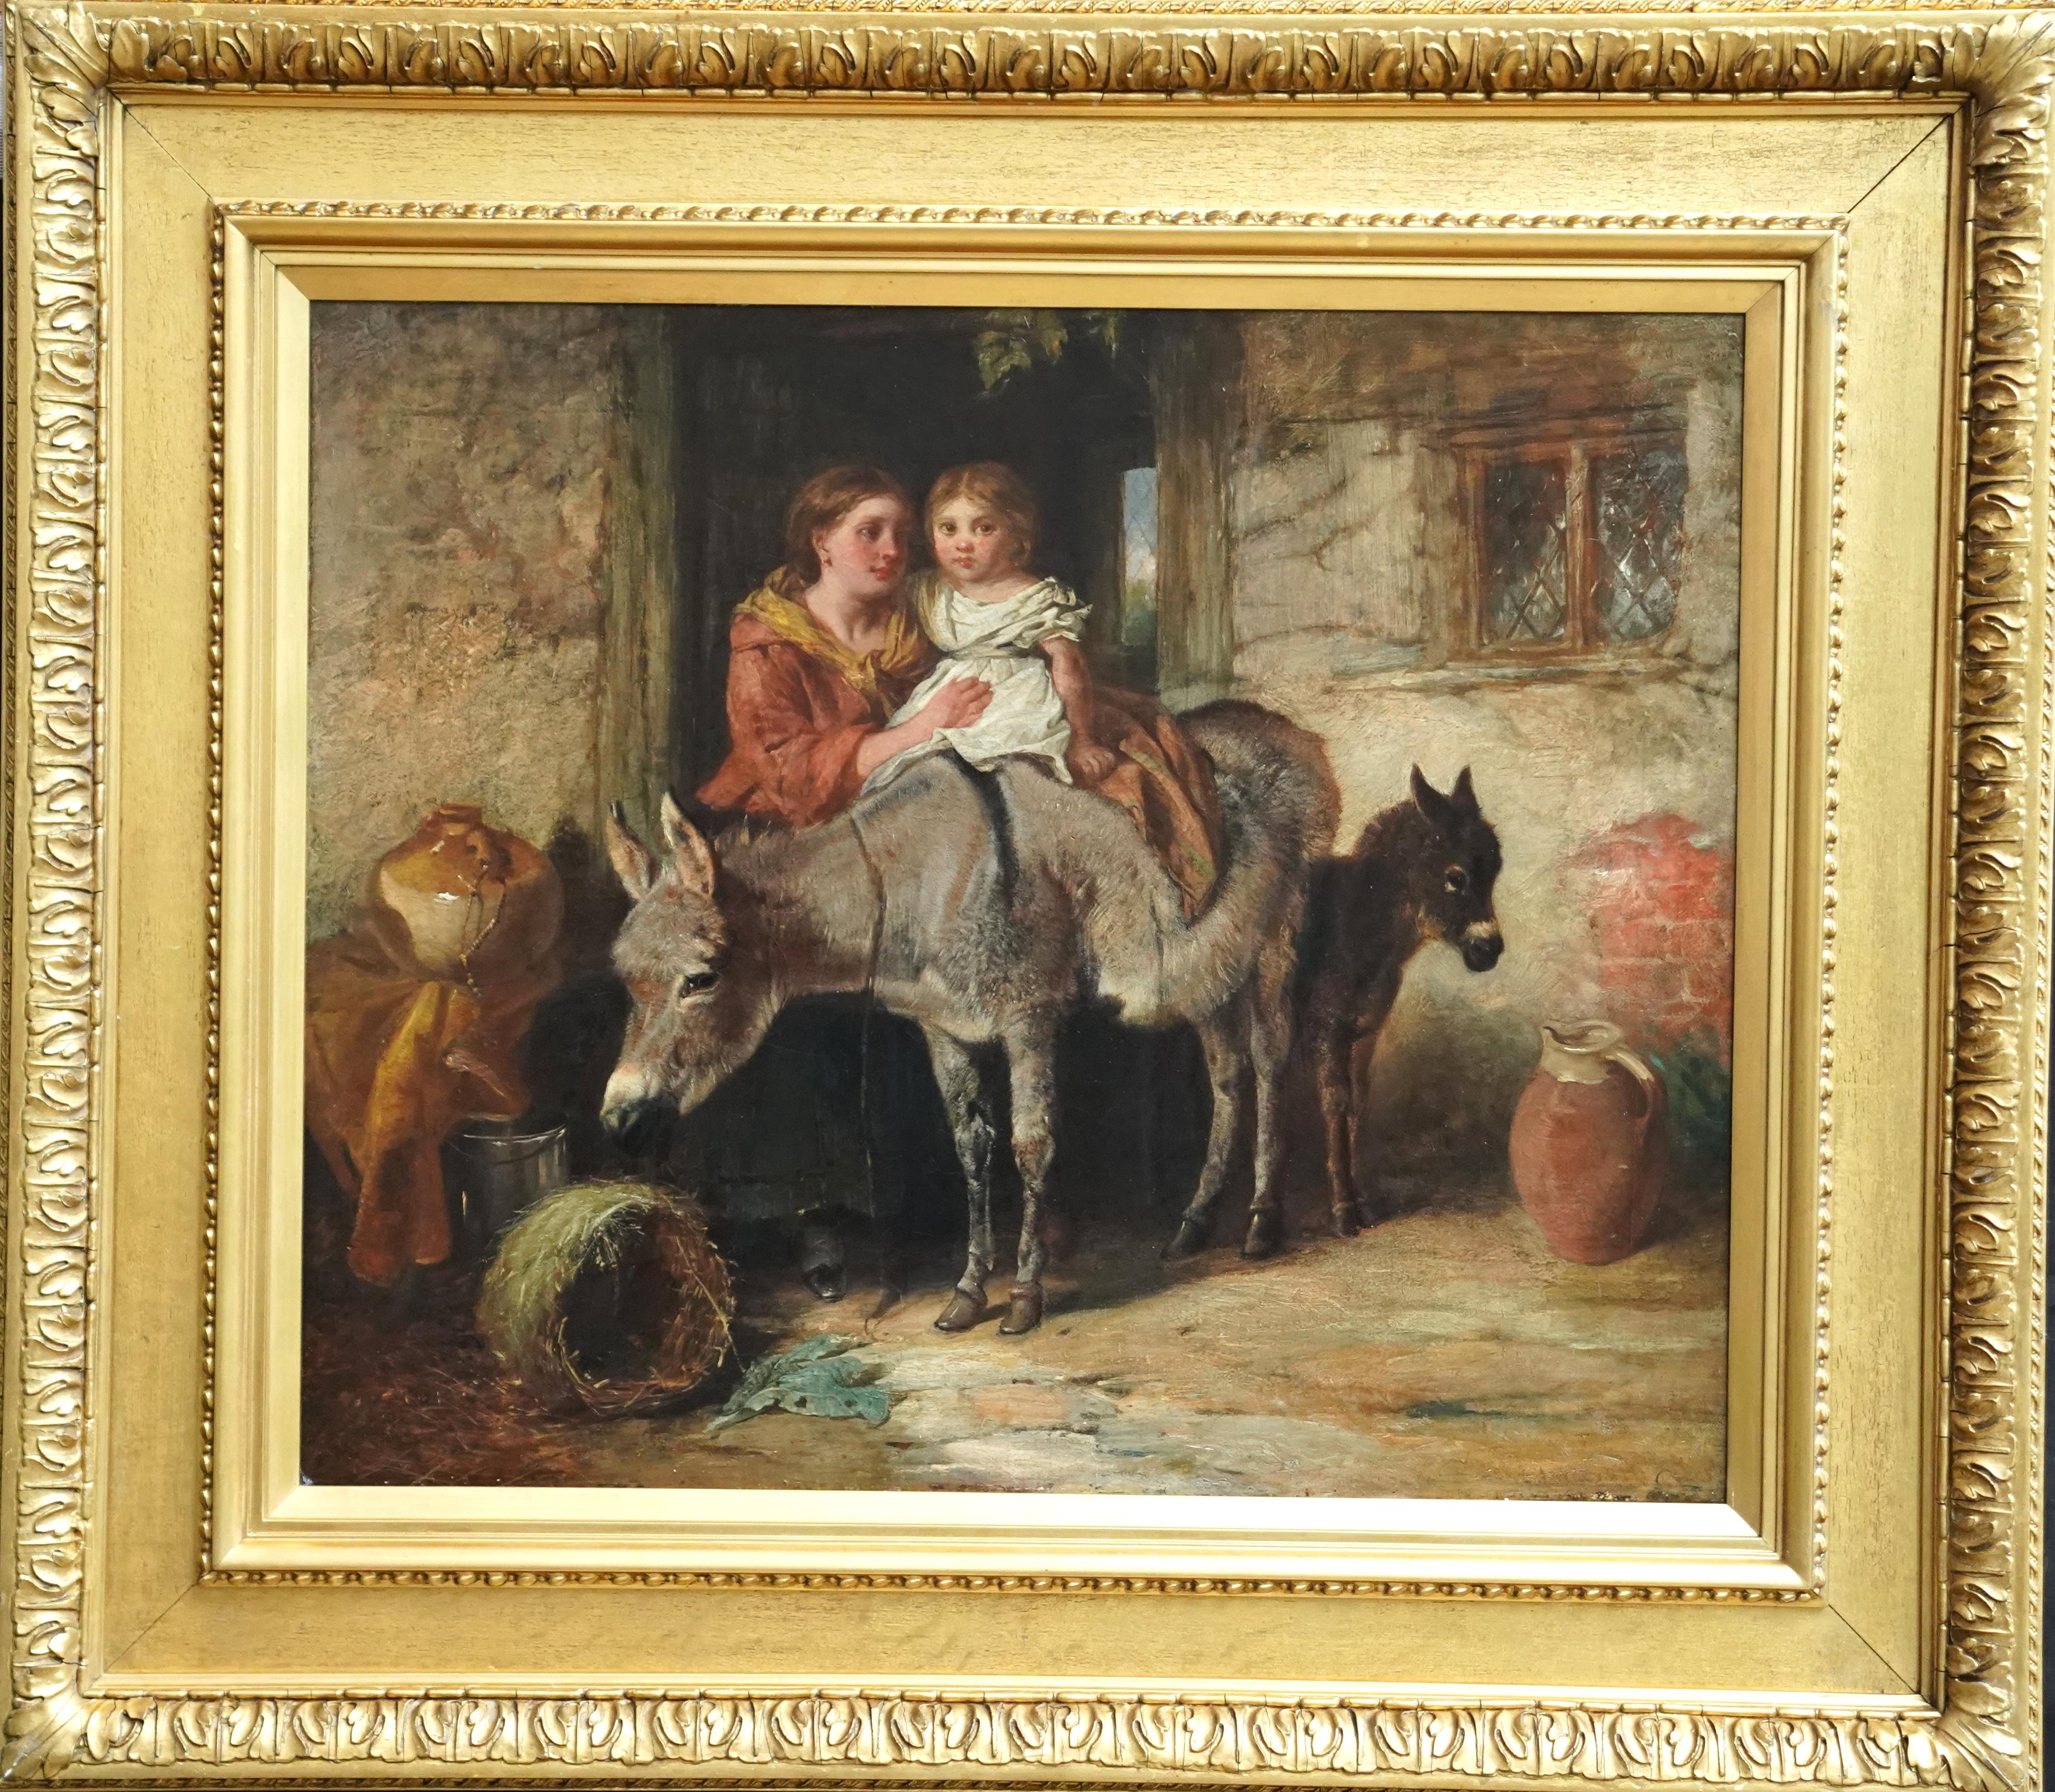 Portrait of Mother, Child and Donkey - British 19th century genre oil painting 7